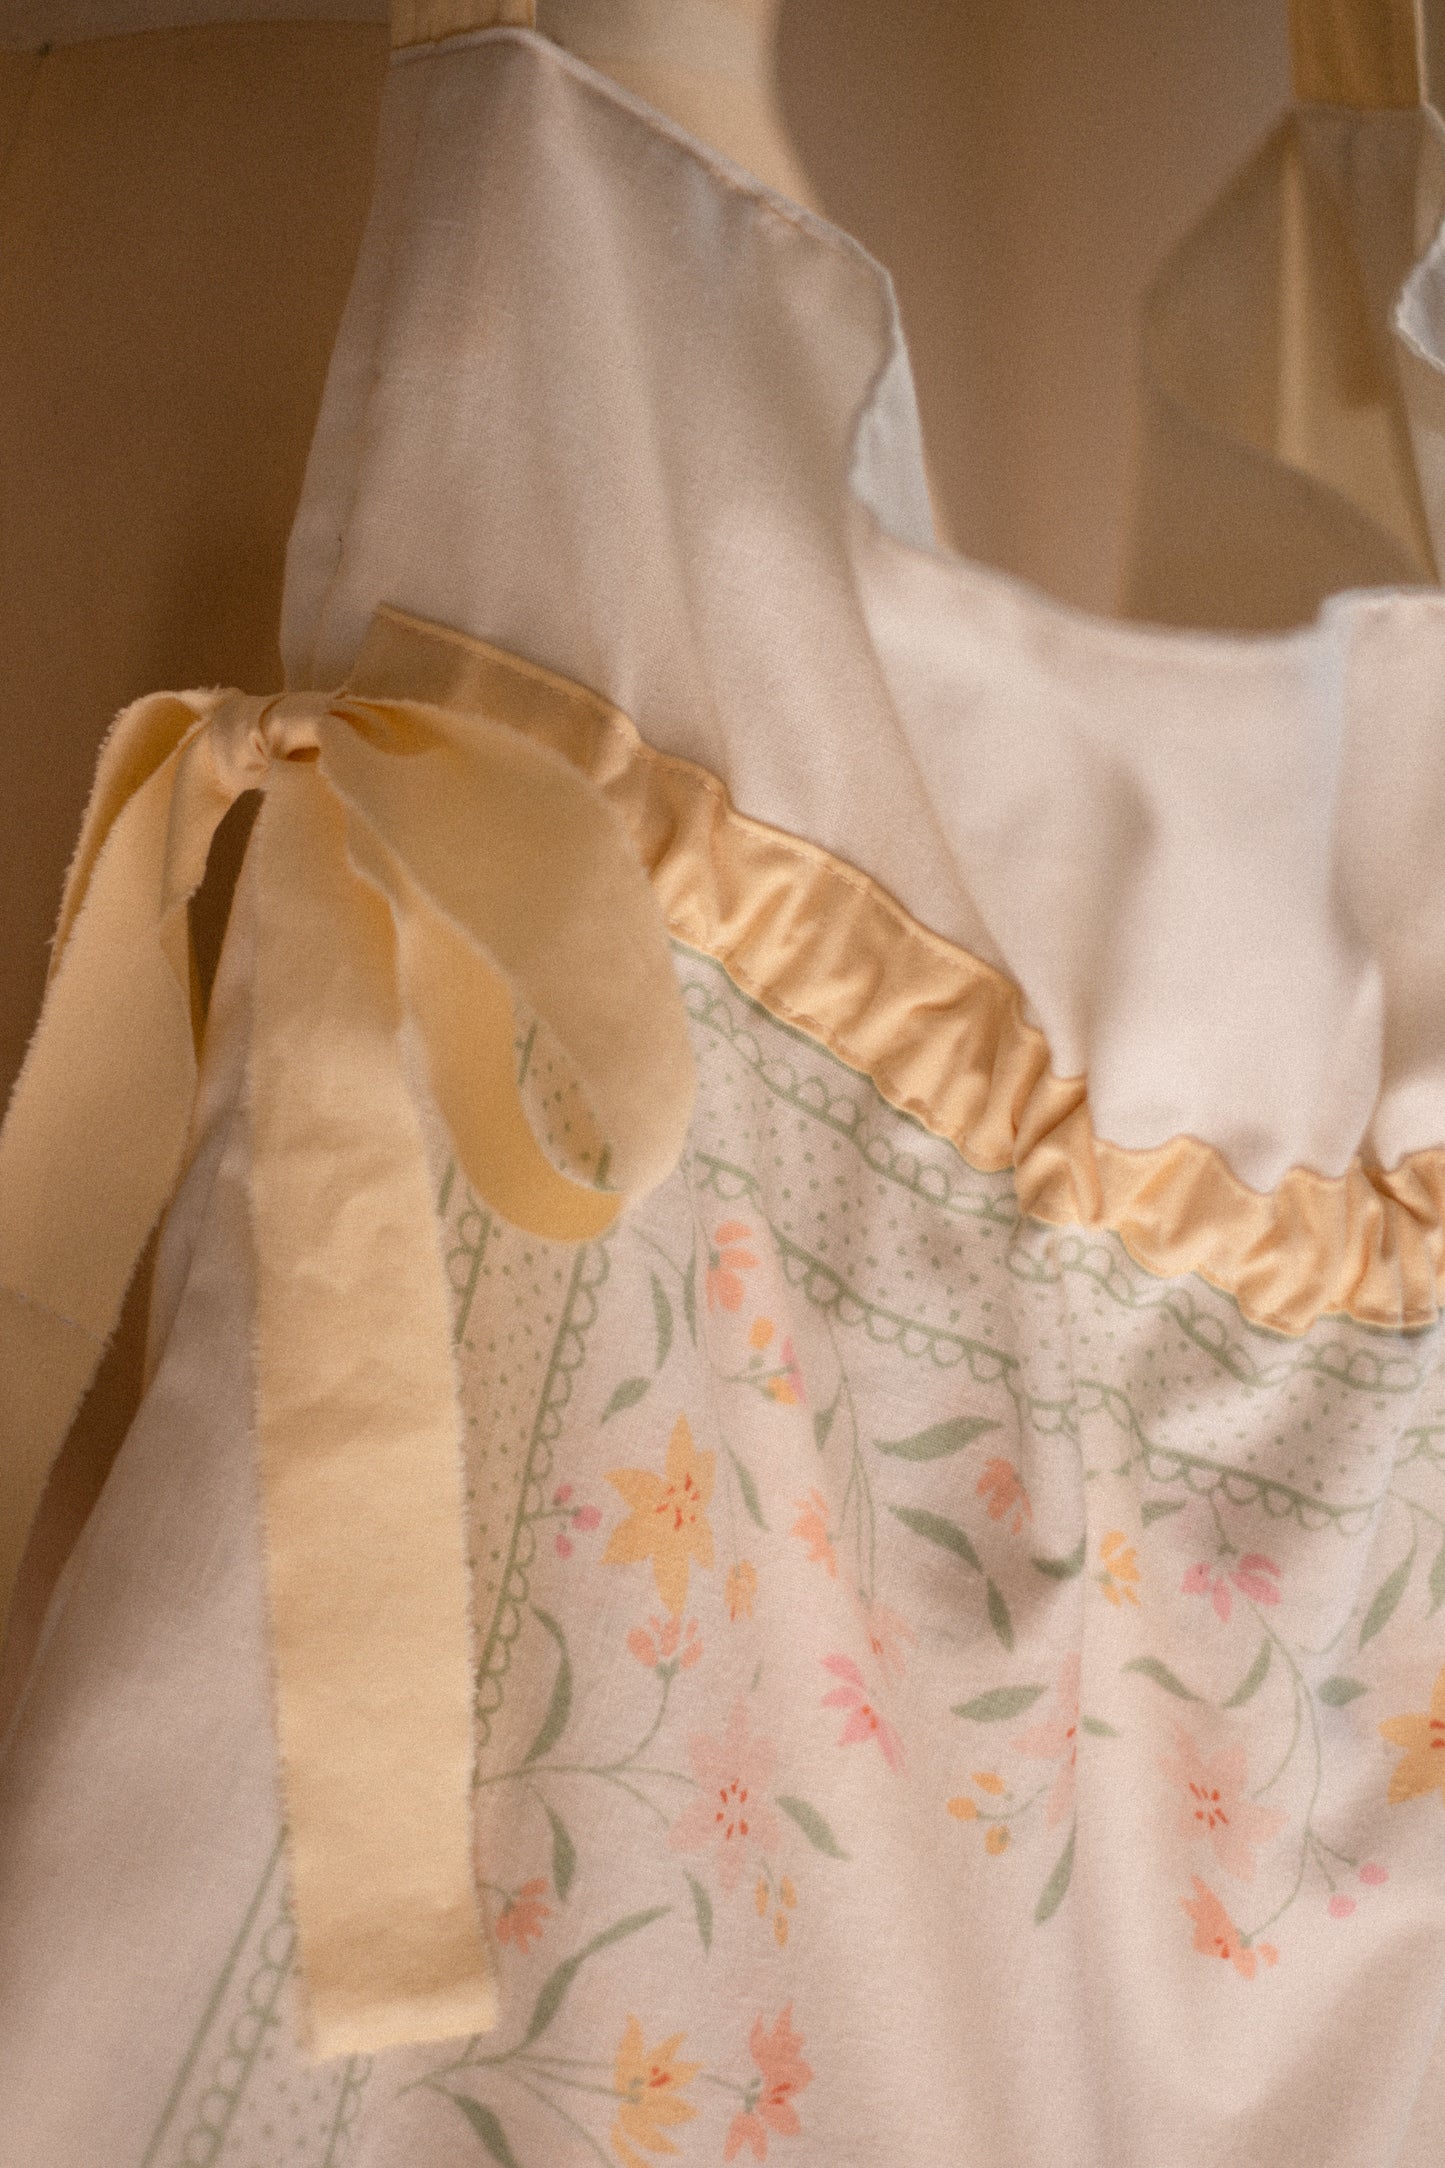 New♡ Cotton ruffled bow slouchy tote bag - Lizzie